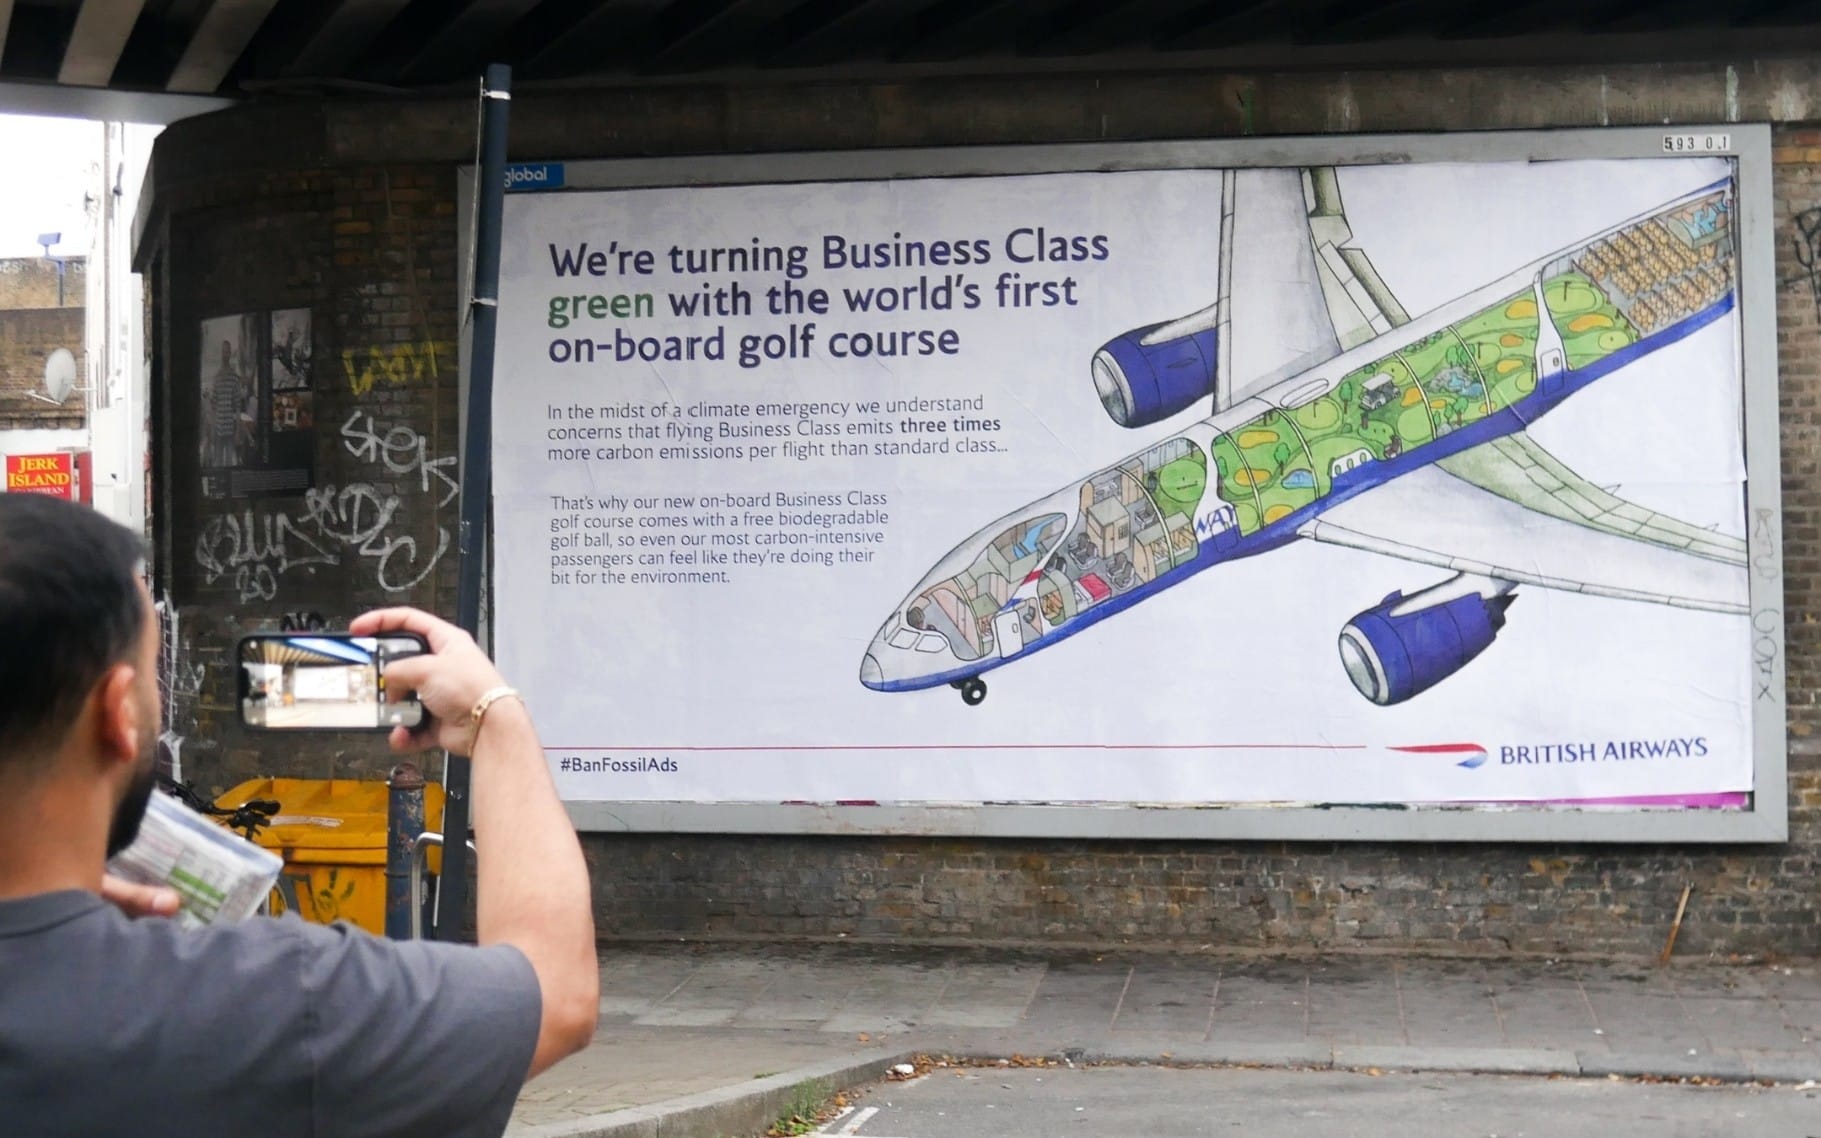 Billboard with a cross-section illustration of a plane, depicting a golf-course onboard. Accompanying text description reads as follows: We're turning Business Class green with the world's first on-board golf course. In the midst of a climate emergency we understand concerns that flying Business Class emits three times more carbon emissions per flight than standard class... That's why our new on-board Business Class golf course comes with a free biodegradable golf ball, so even our most carbon-intensive passengers can feel like they're doing their bit for the environment.